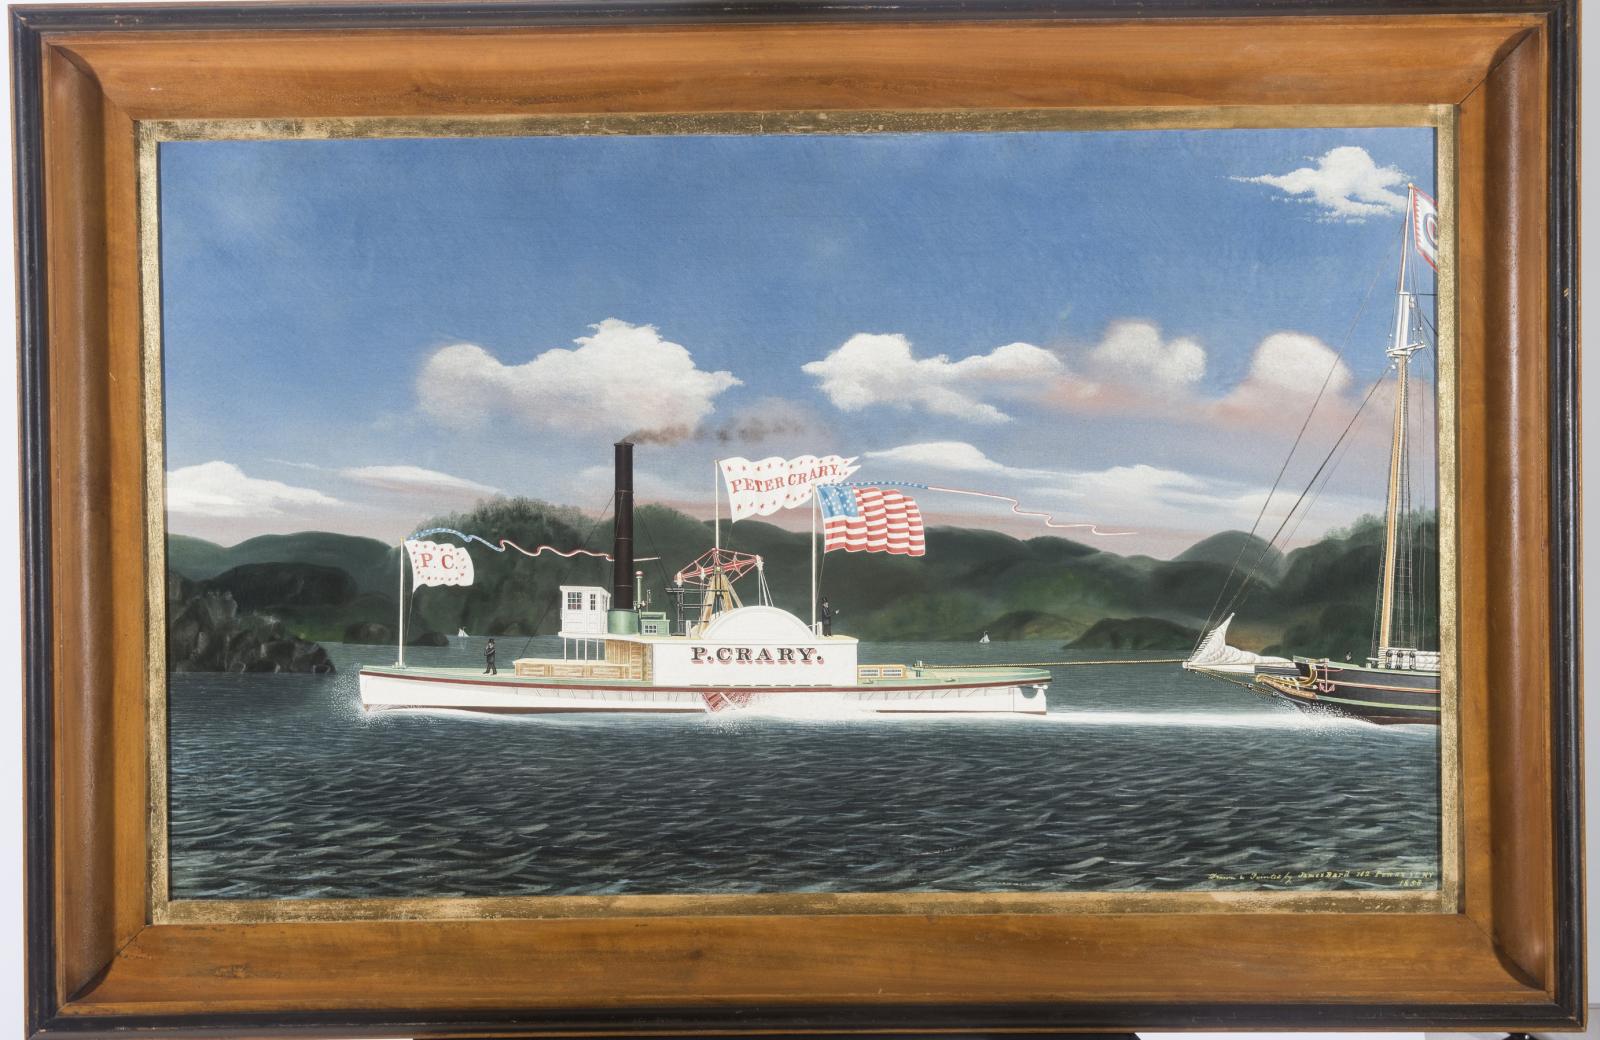 Oil painting of the profile of a steamship on the water in front of green hills; the boat is flying an American flag and towing a sloop with a tall mast, the sloop's back half cut off from view by the edge of the canvas.